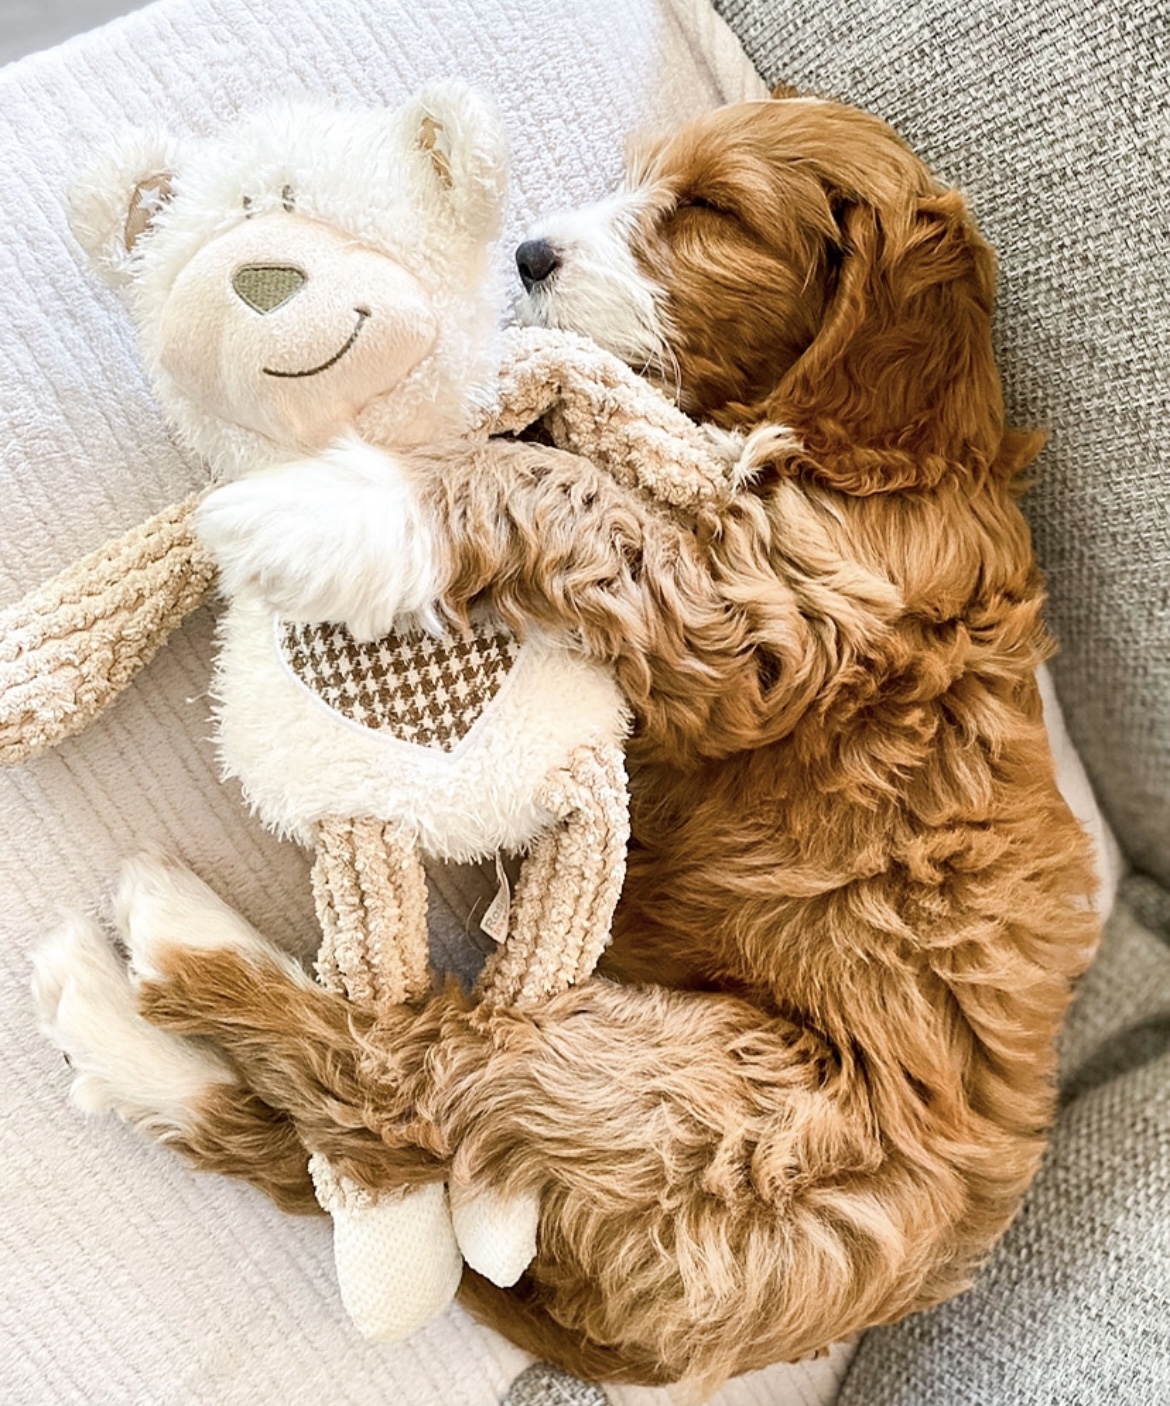 Hereford Times: Nap with Teddy